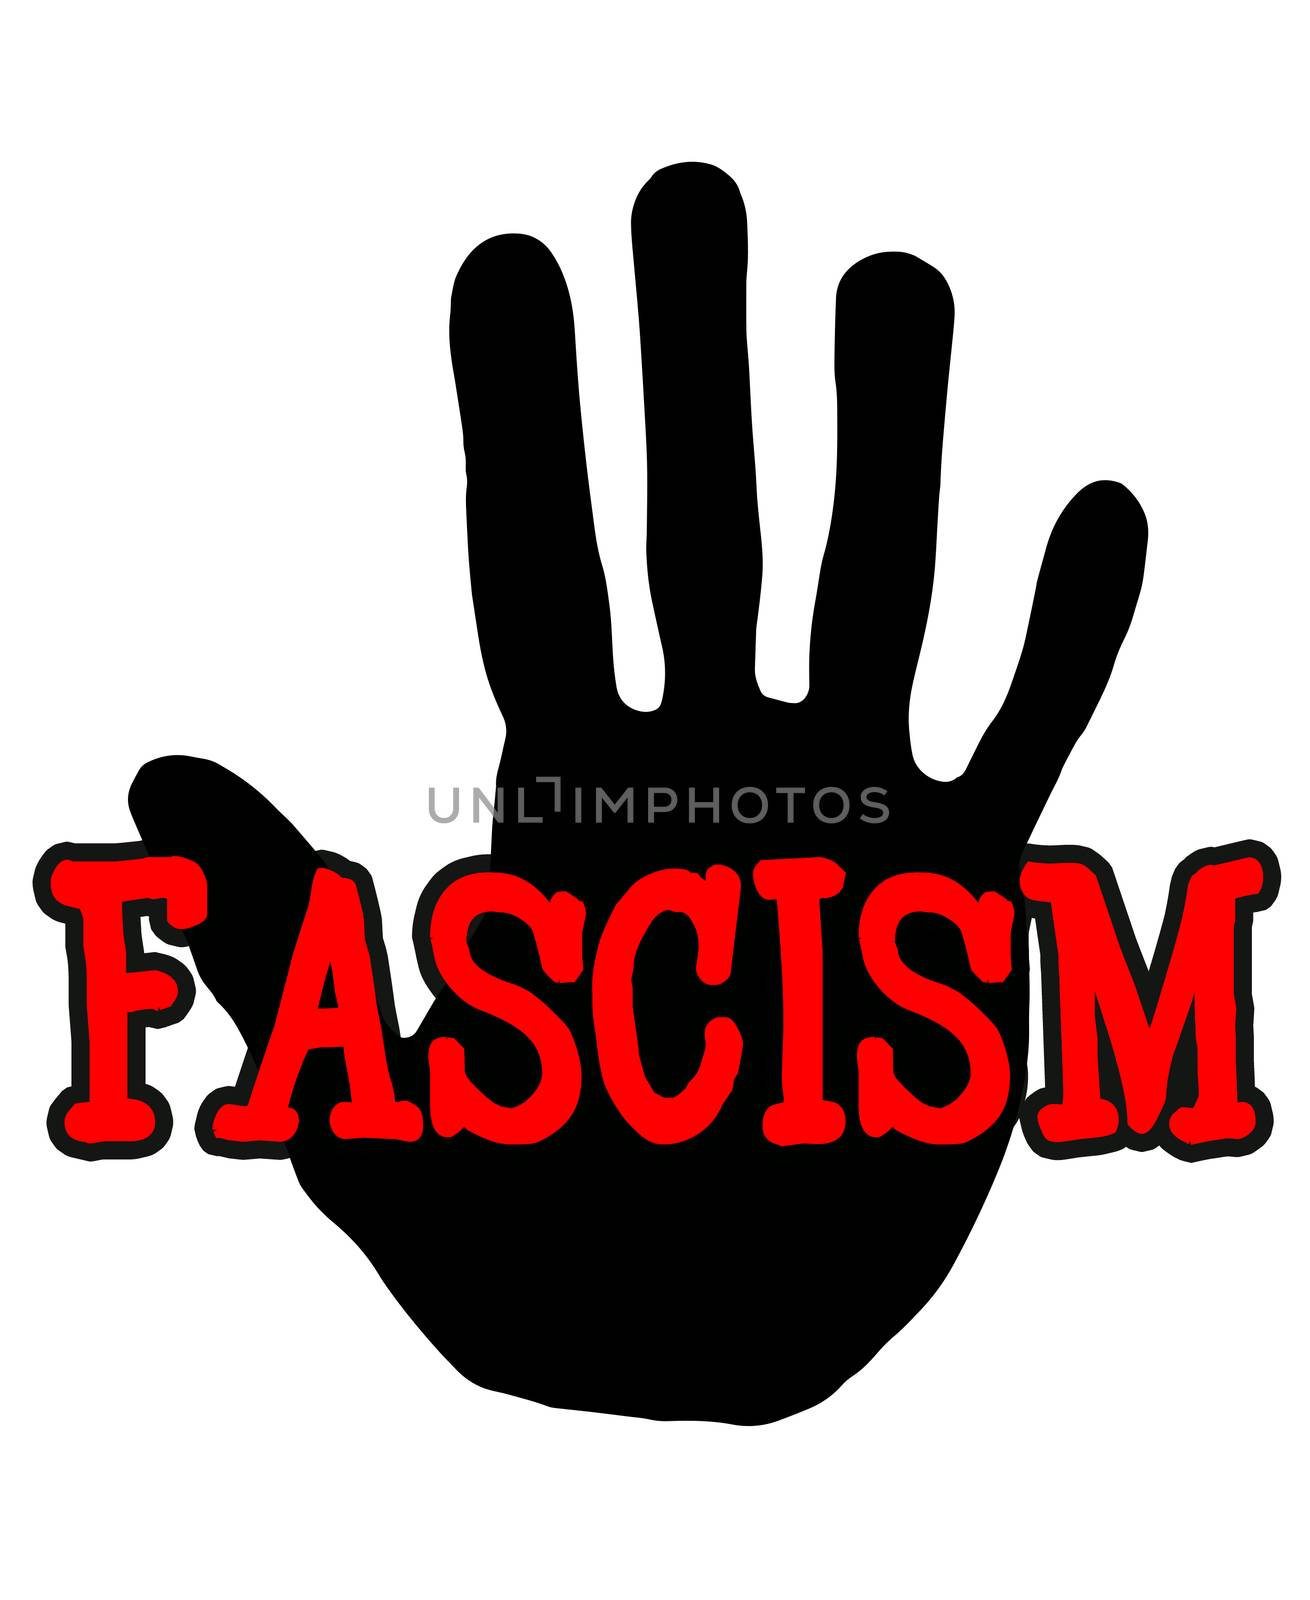 Man handprint isolated on white background showing stop fascism